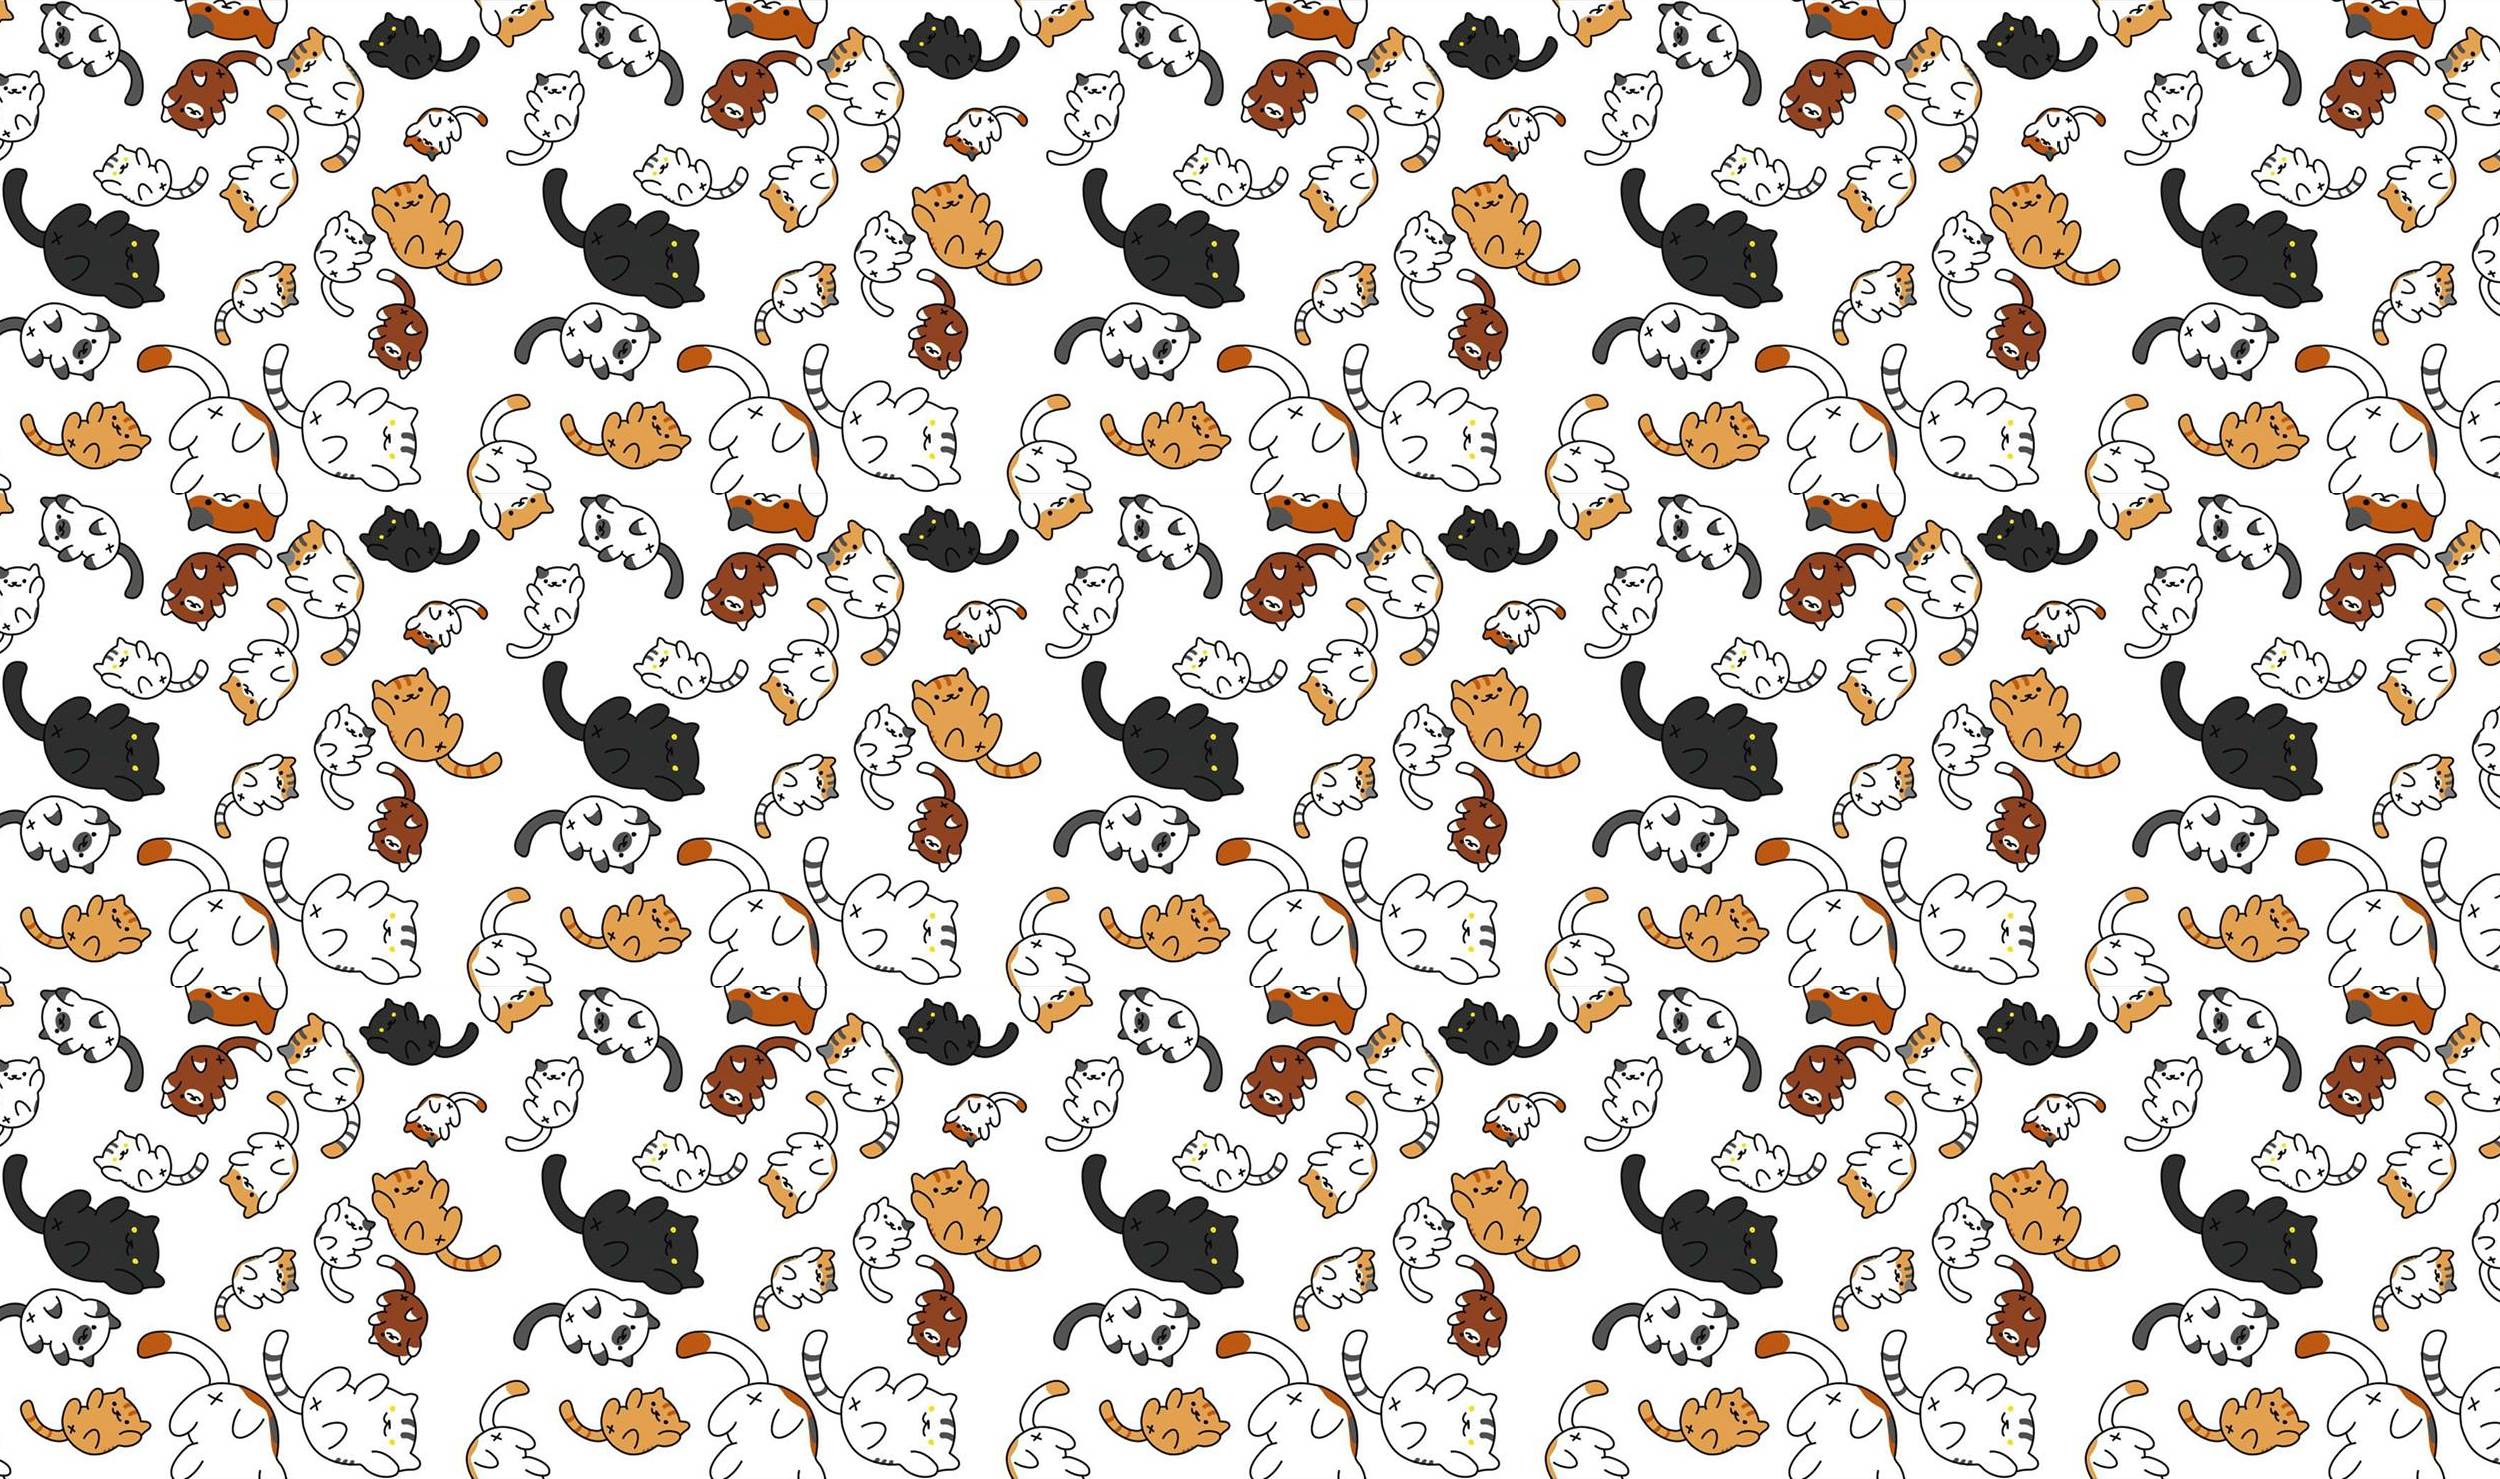 The Best Neko Atsume Wallpaper. The Best Answers